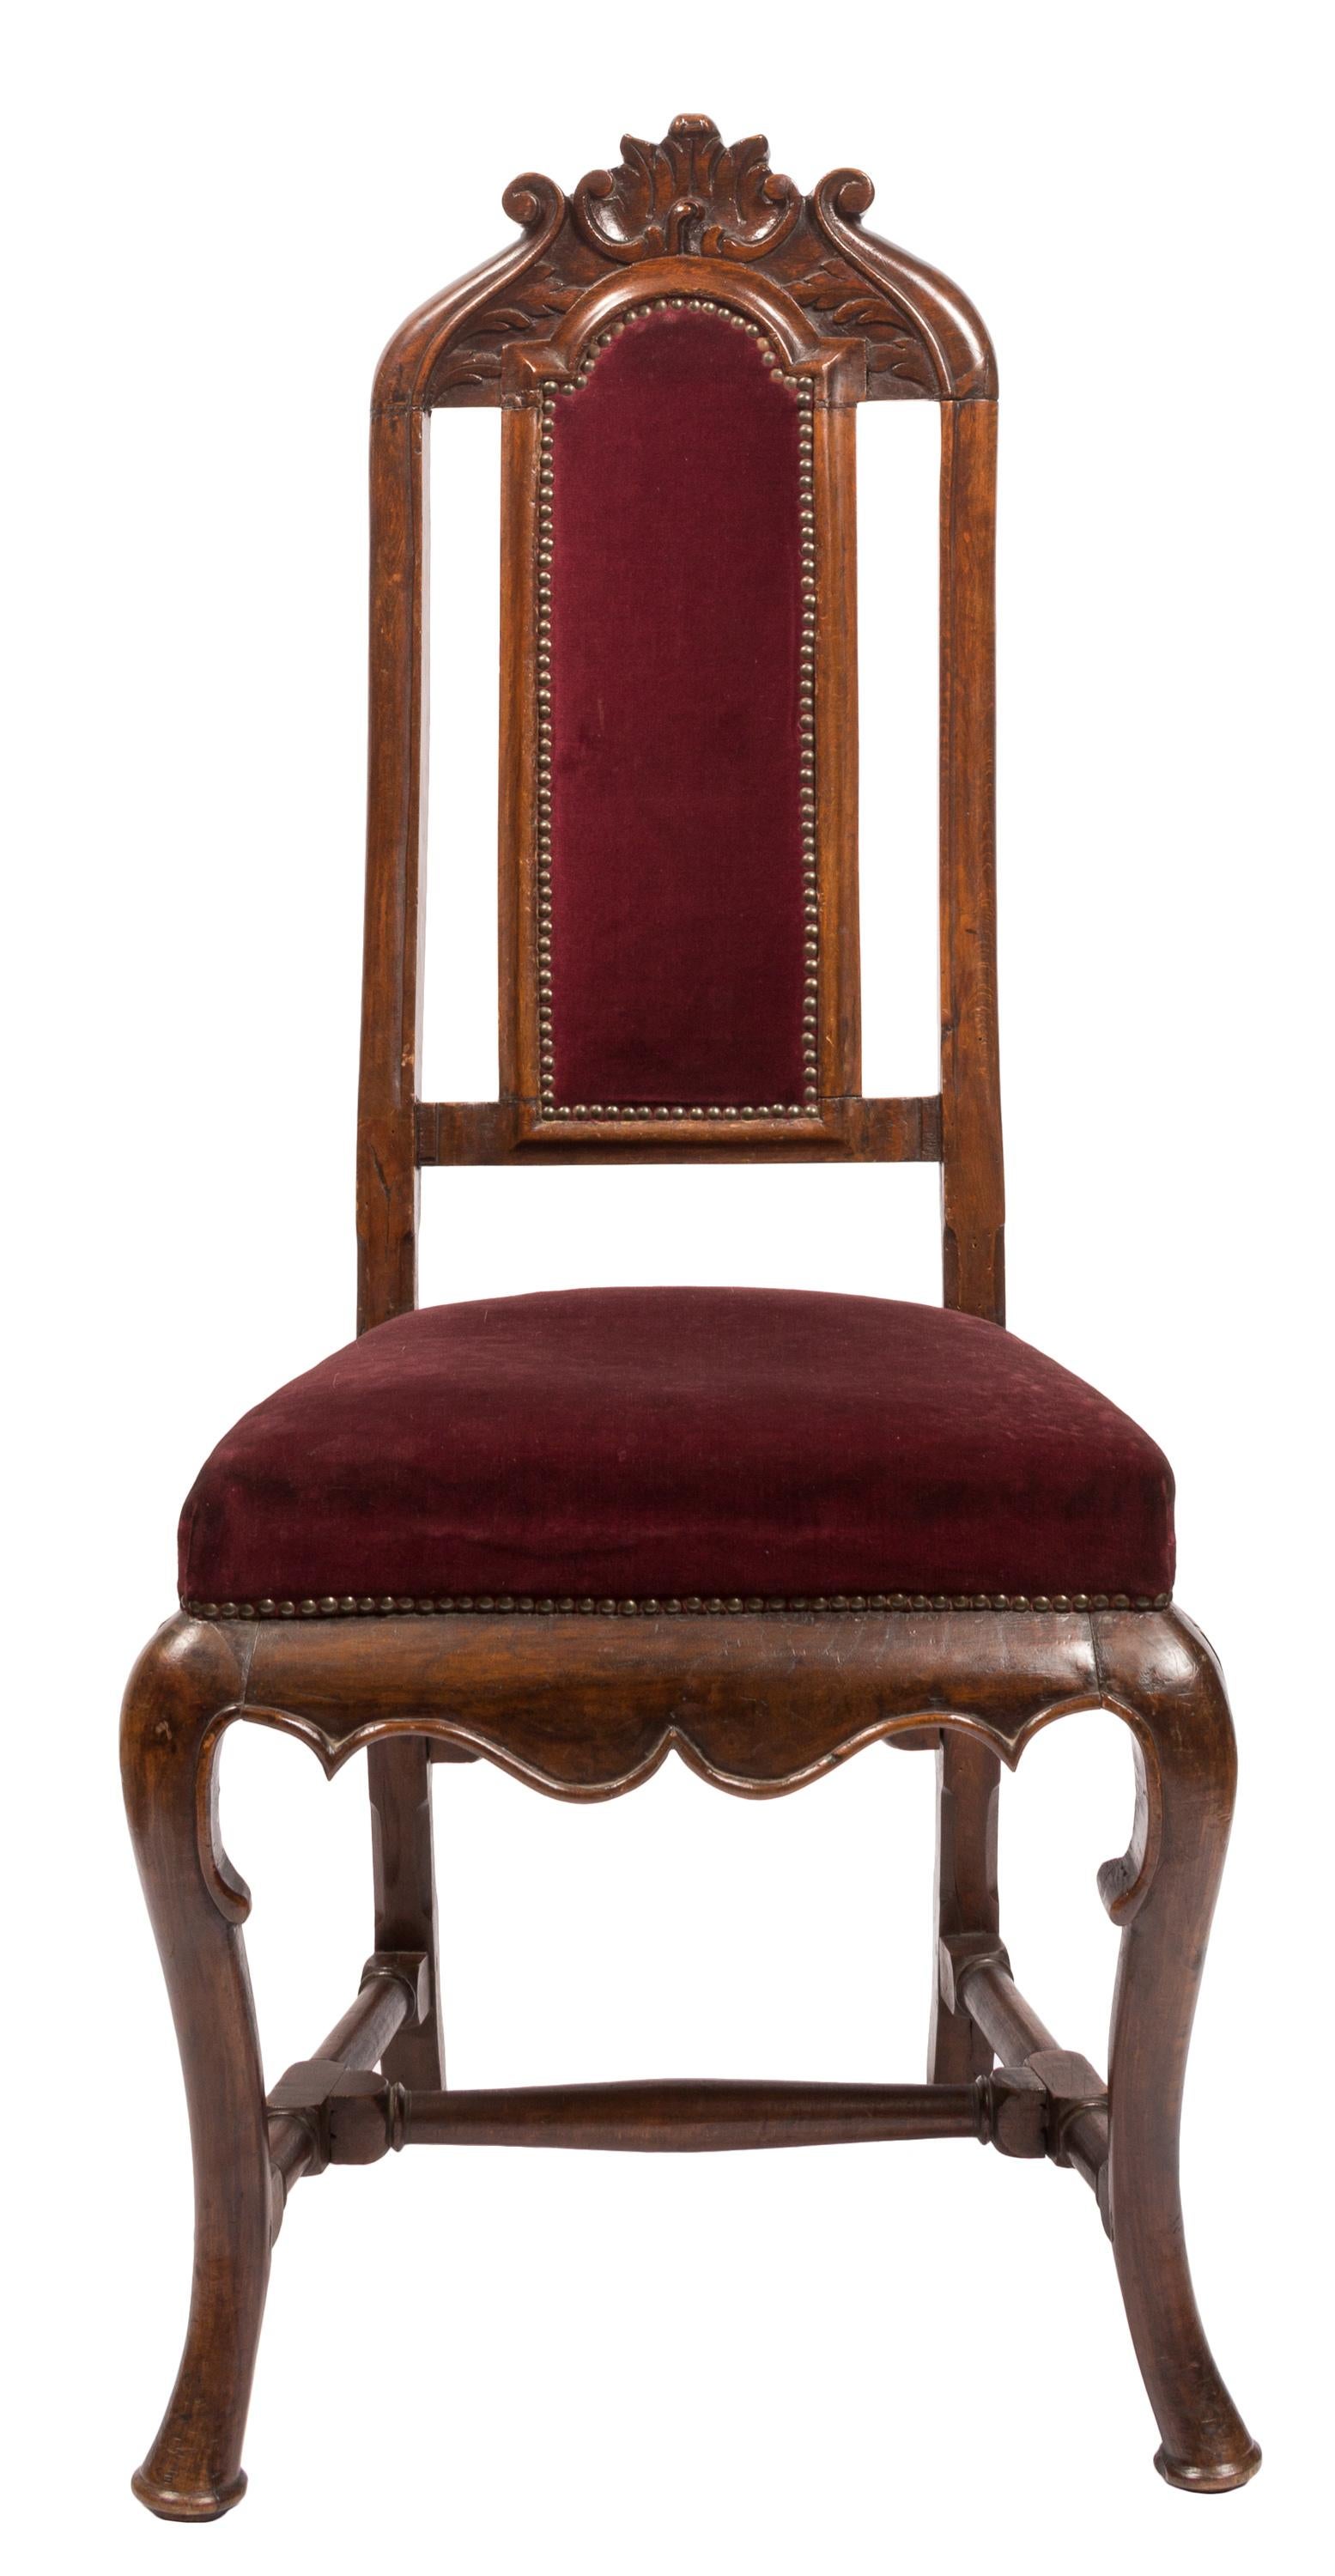 Matched pair of 18th century William & Mary transition to Queen Anne style side chairs with hand carved details. Upholstered with burgundy red velvet fabric featuring brass tacked edges. Crafted in Spain of native walnut, the chairs show the strong